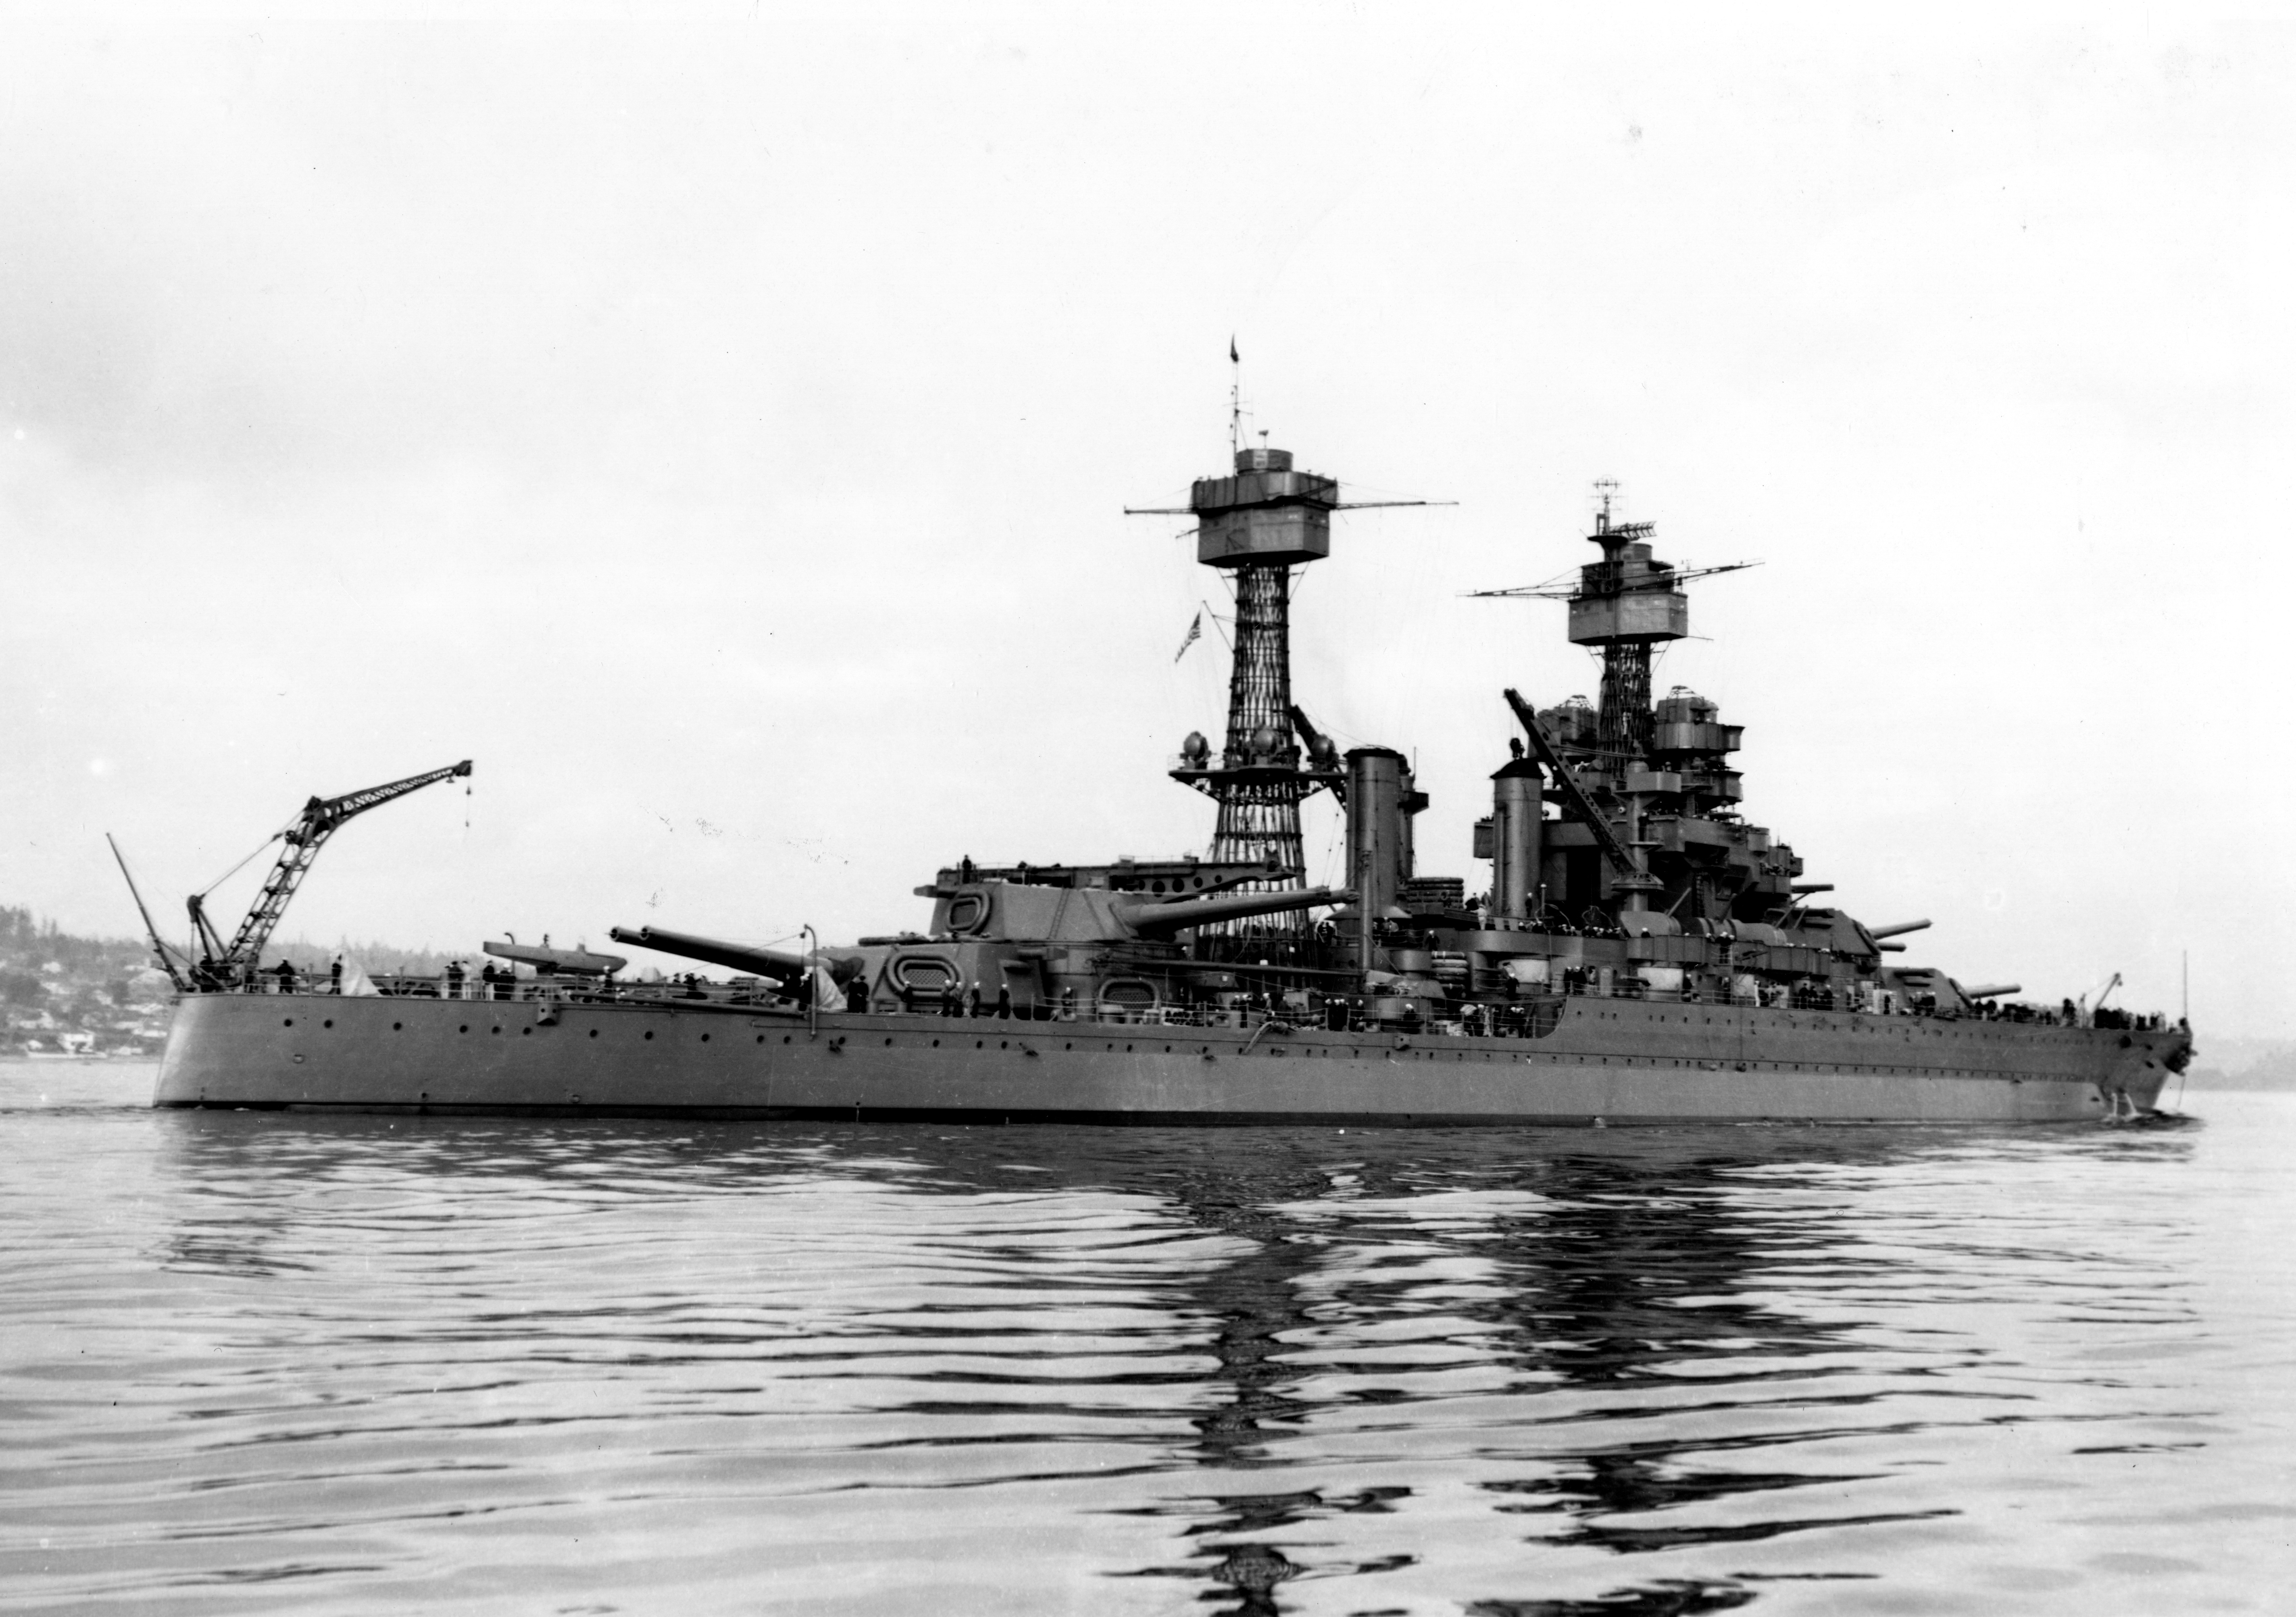 USS Maryland at Puget Sound Naval Shipyard, Bremerton, Washington, United States 9 Feb 1942 after repairs from damage received in the attack on Pearl Harbor three months earlier. Photo 2 of 2.